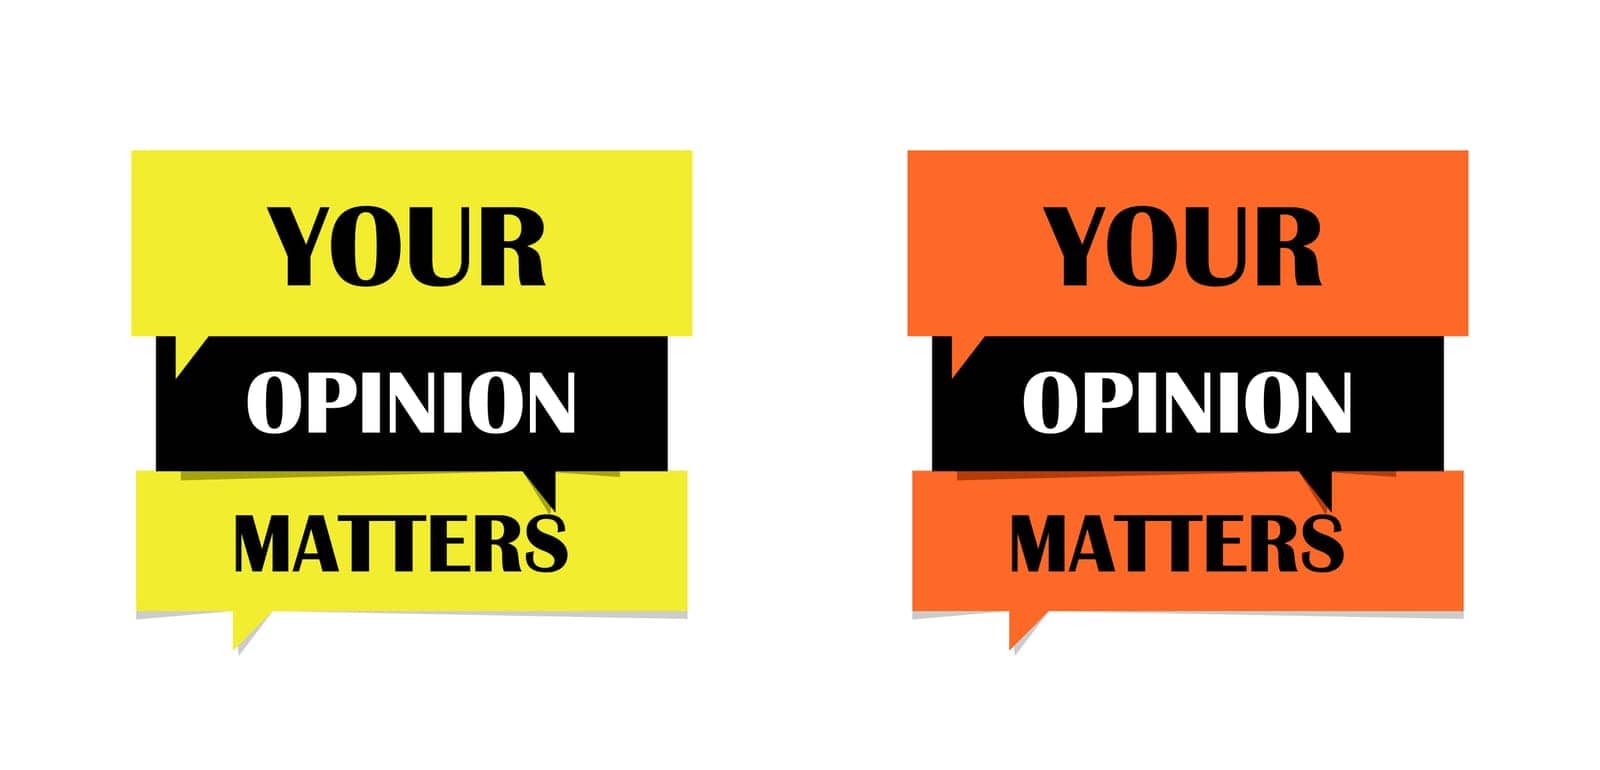 Your opinion matters set of posters by MakeVector